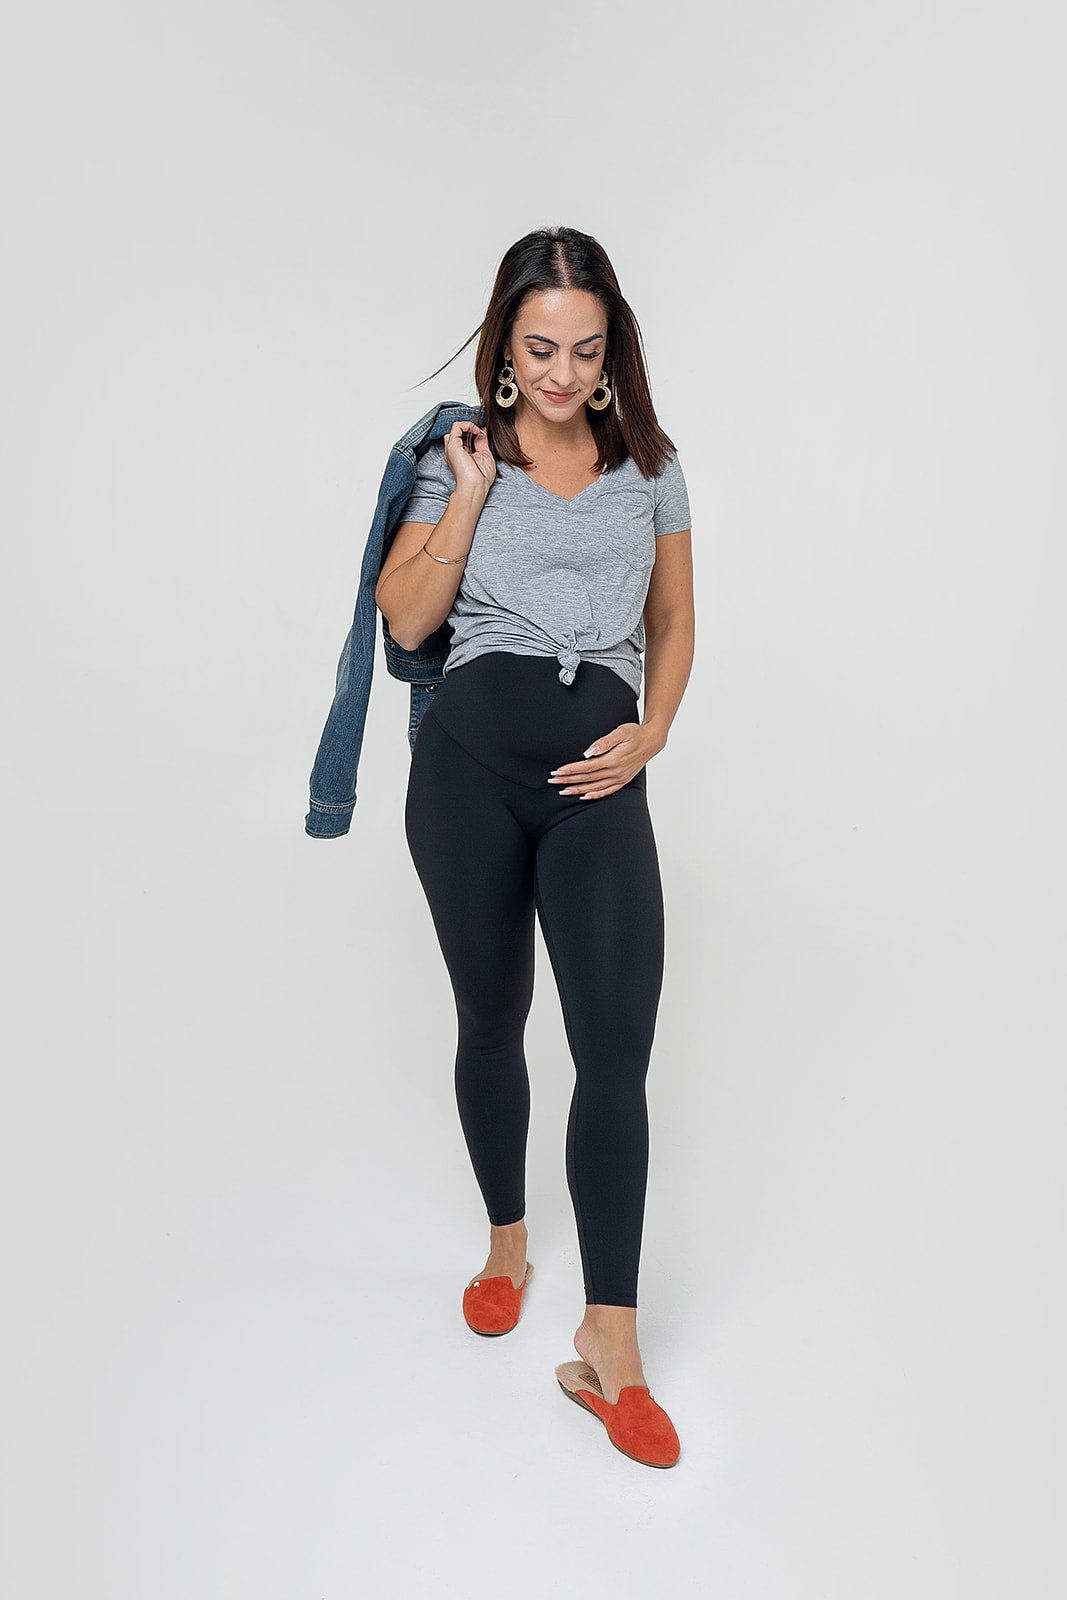 7 Must Have Maternity Pieces For A Stylish, Sustainable Wardrobe – MARION  Maternity